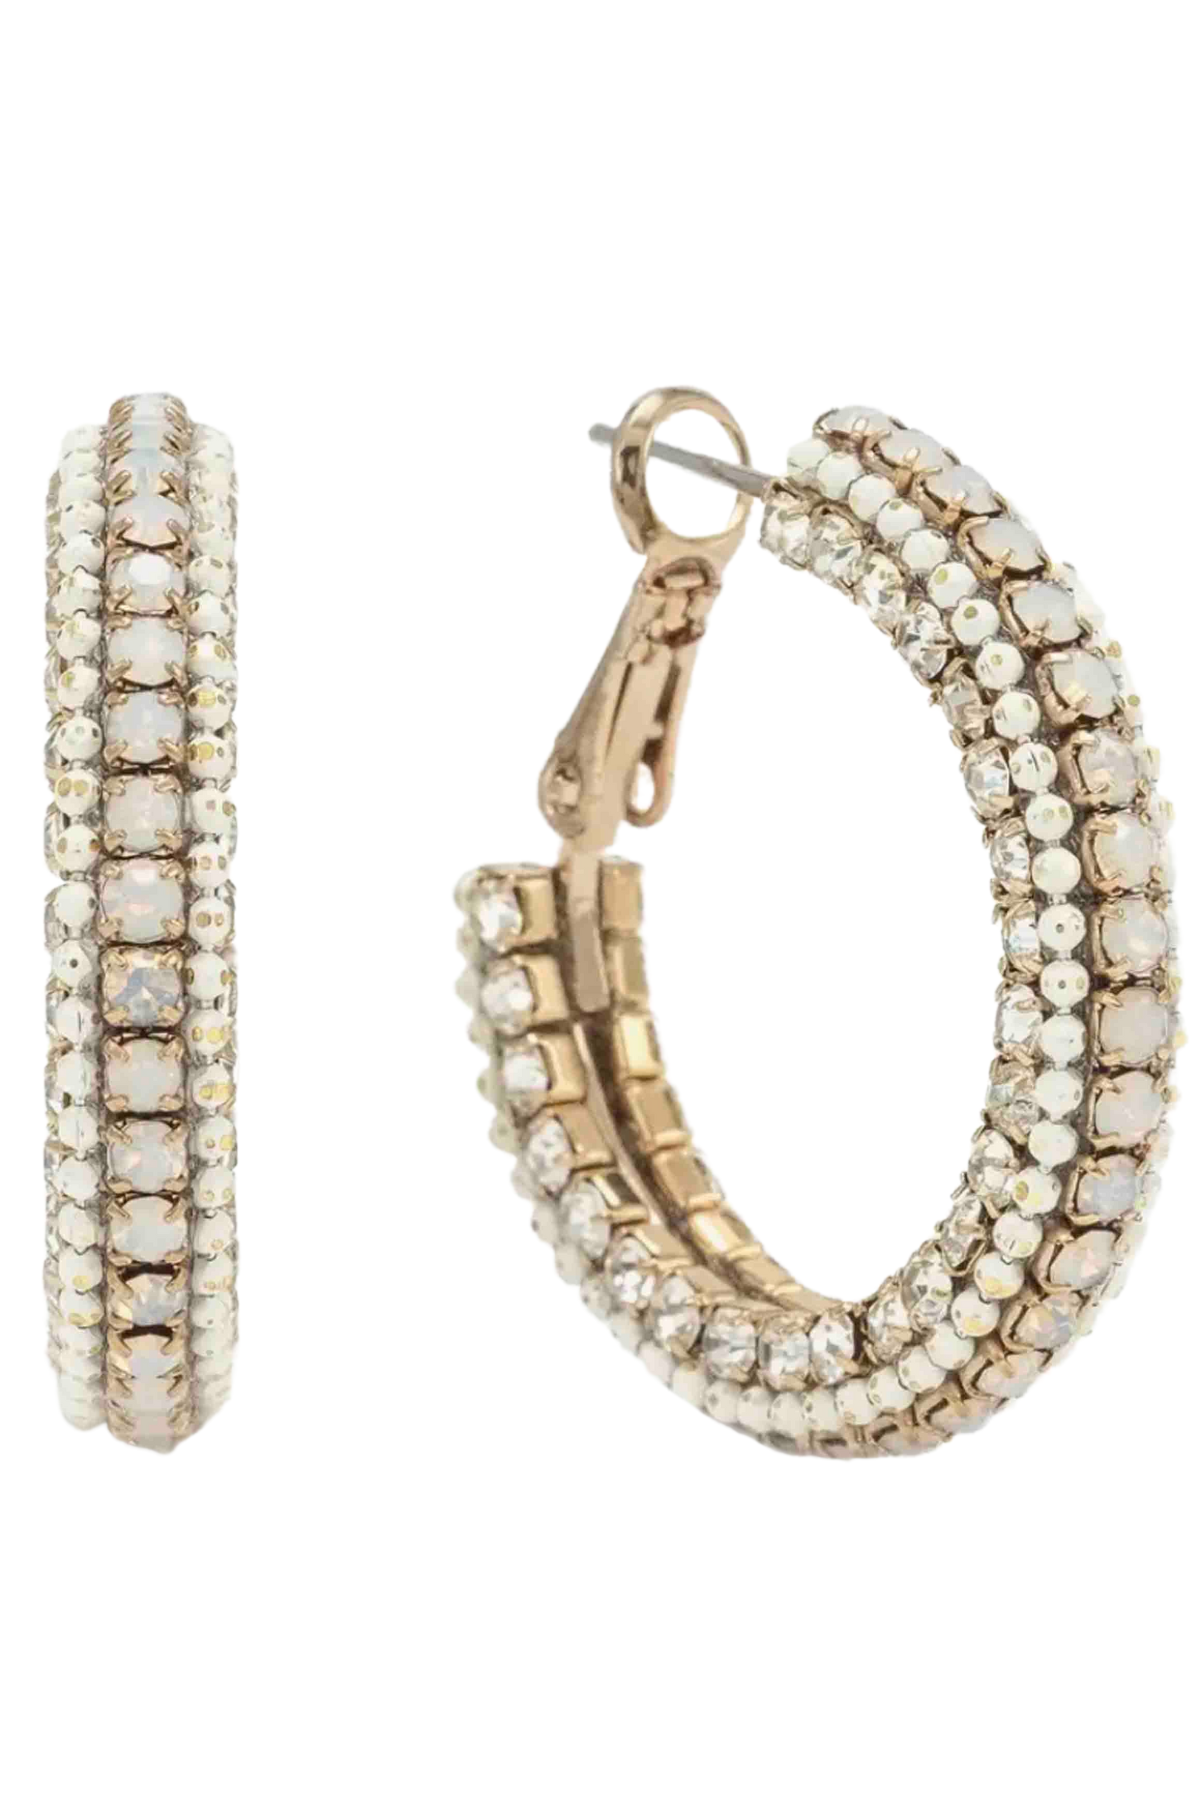 Astaire White Hoop Earrings by Lover's Tempo